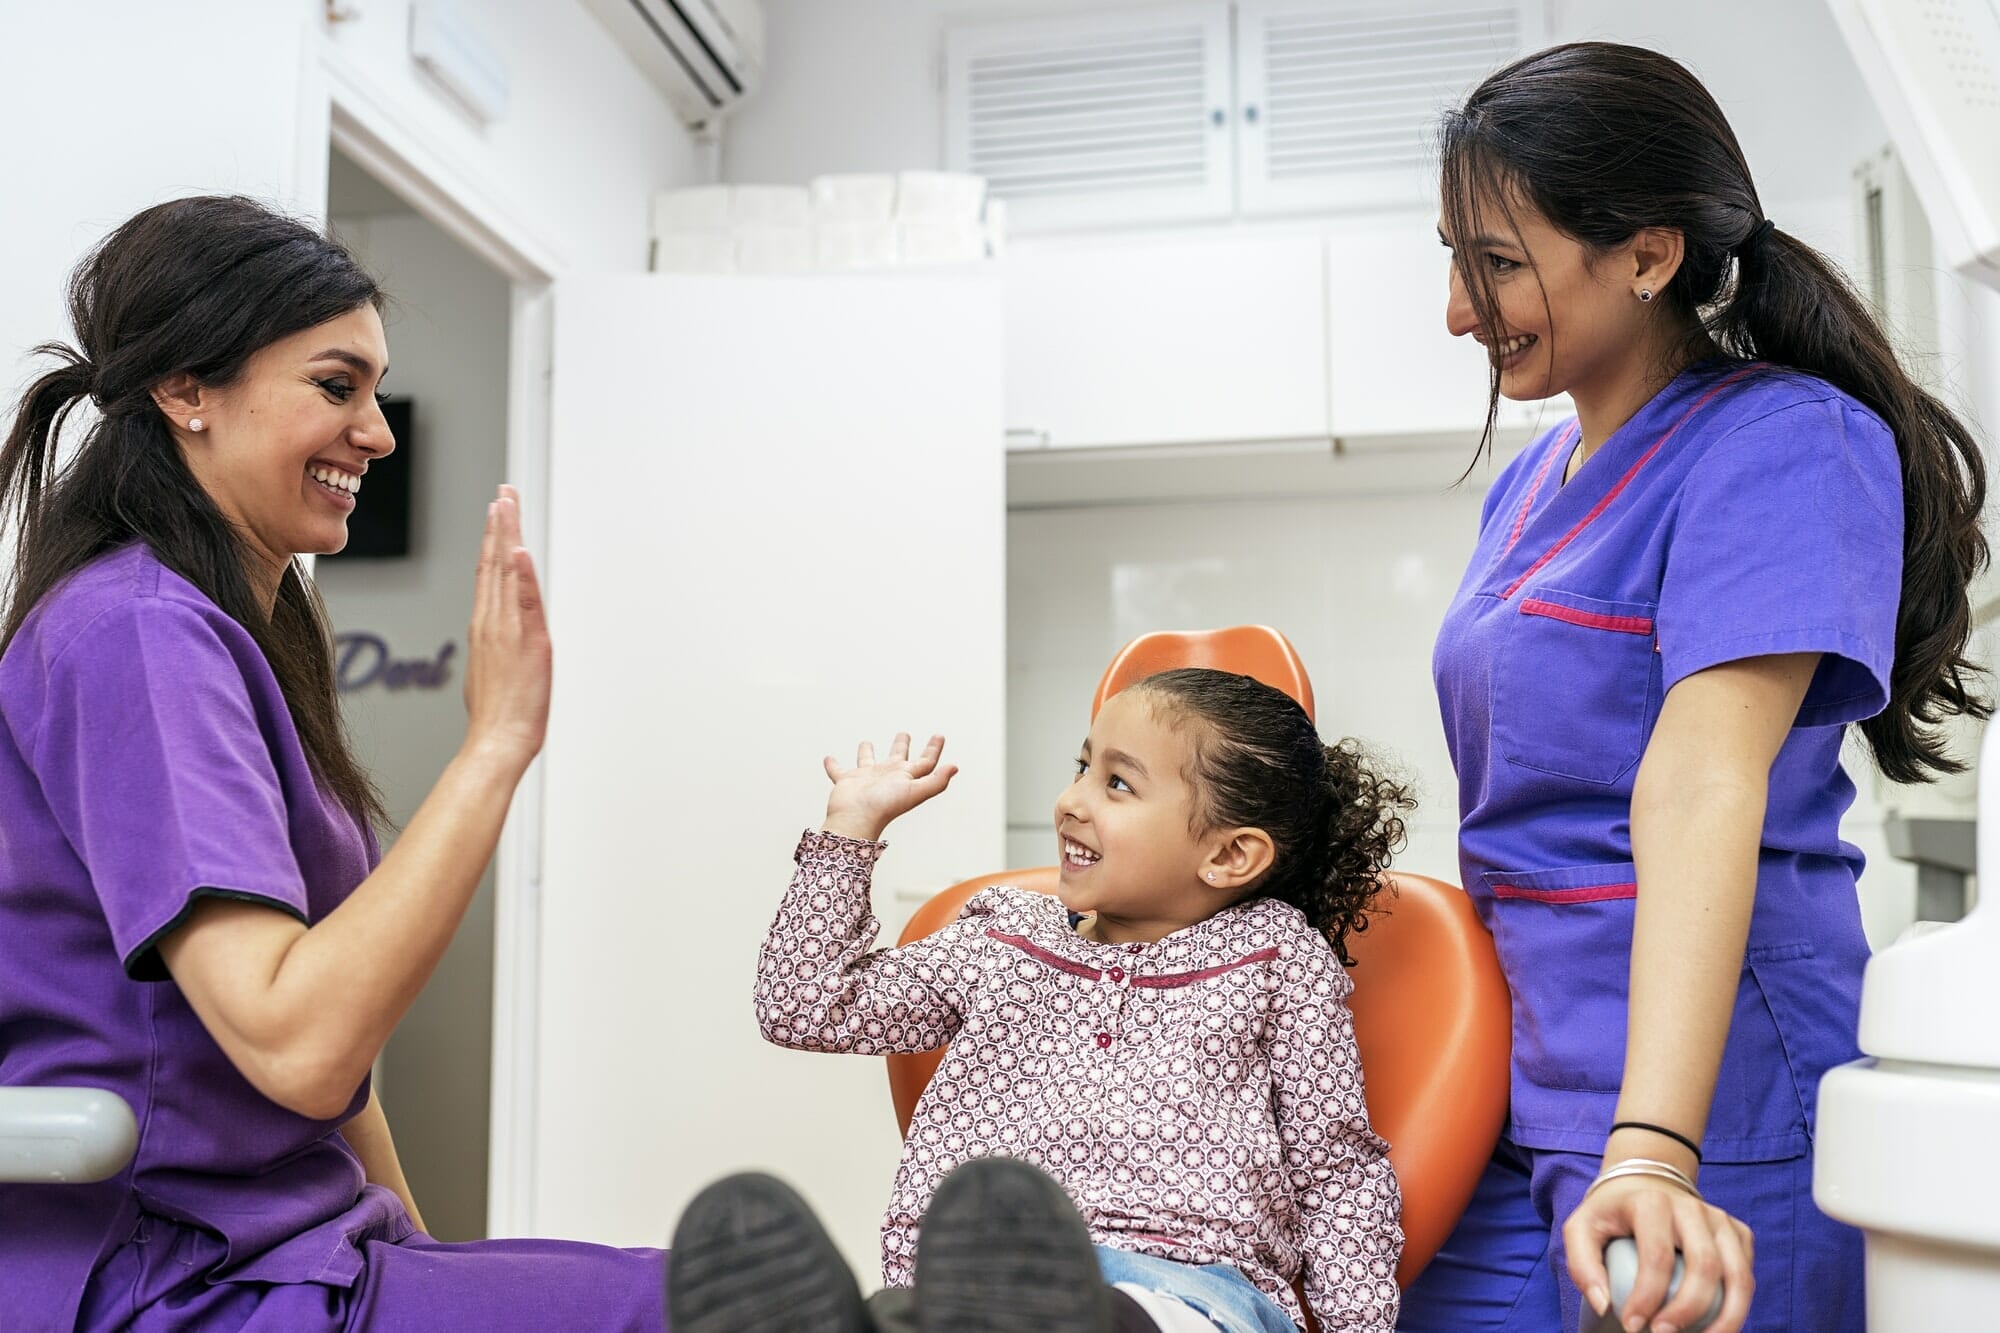 Cosmetic Dentist Marketing can bring new patients. Image shows Dentist doctor and child patient having fun